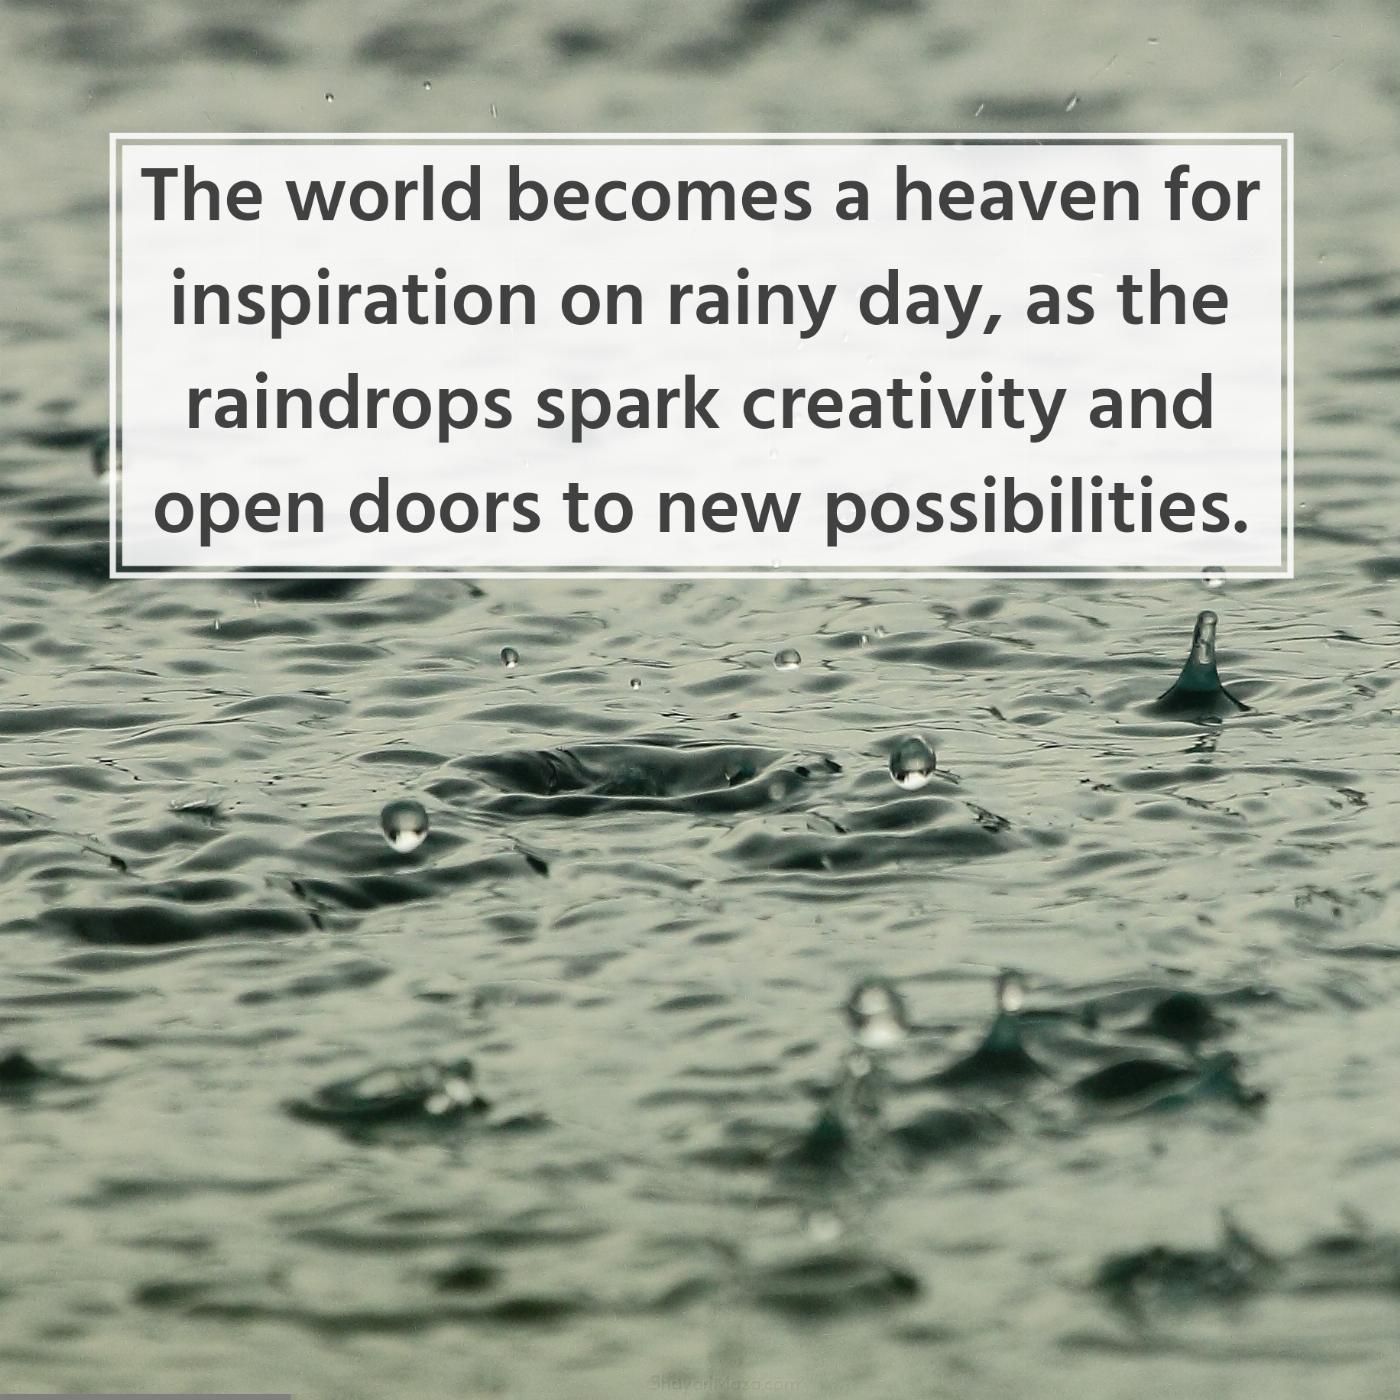 The world becomes a heaven for inspiration on rainy day